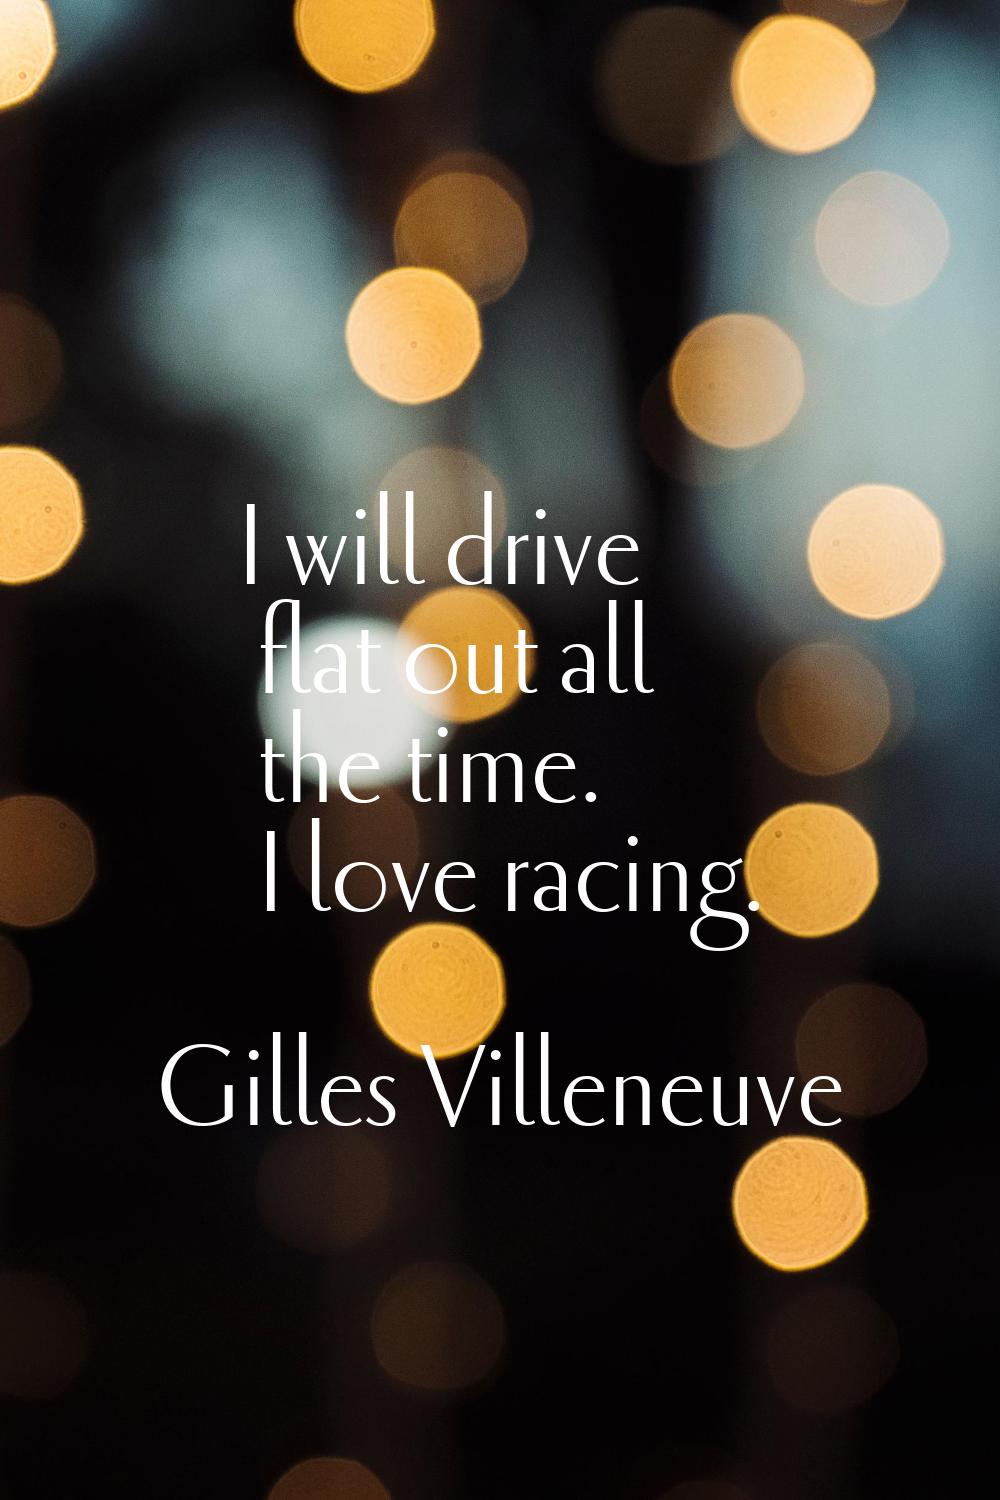 I will drive flat out all the time. I love racing.